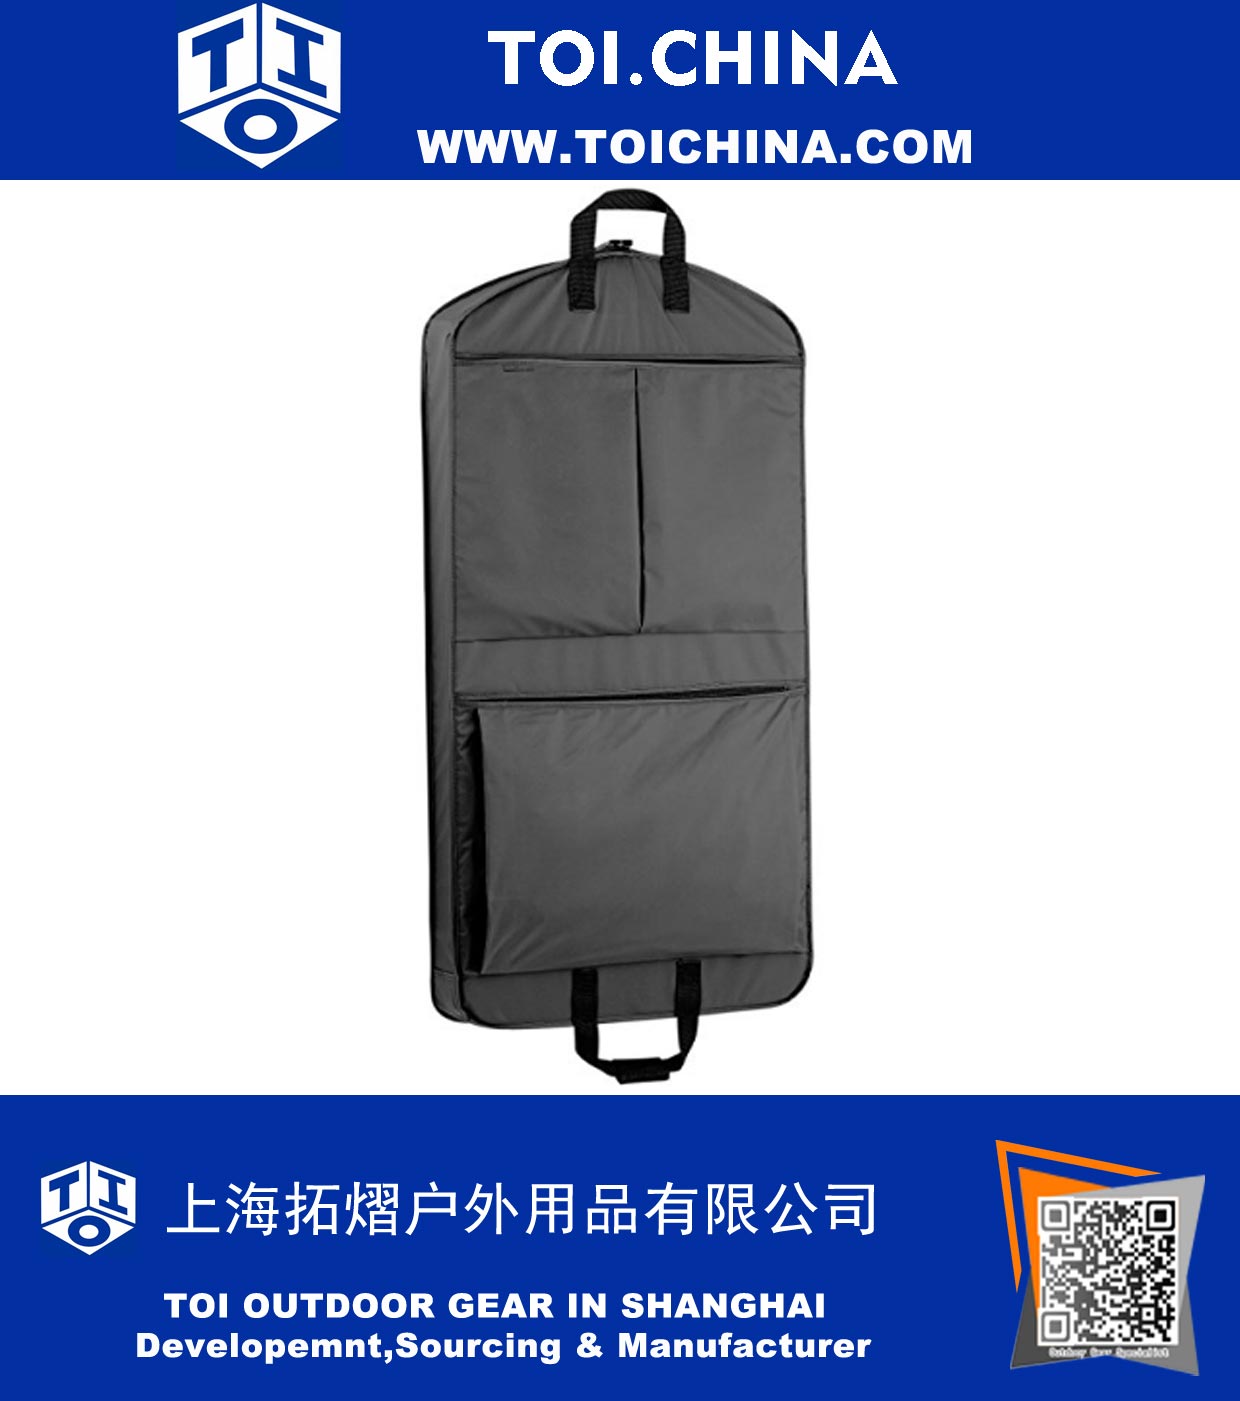 45 Inch Extra Capacity Garment Bag with Pockets